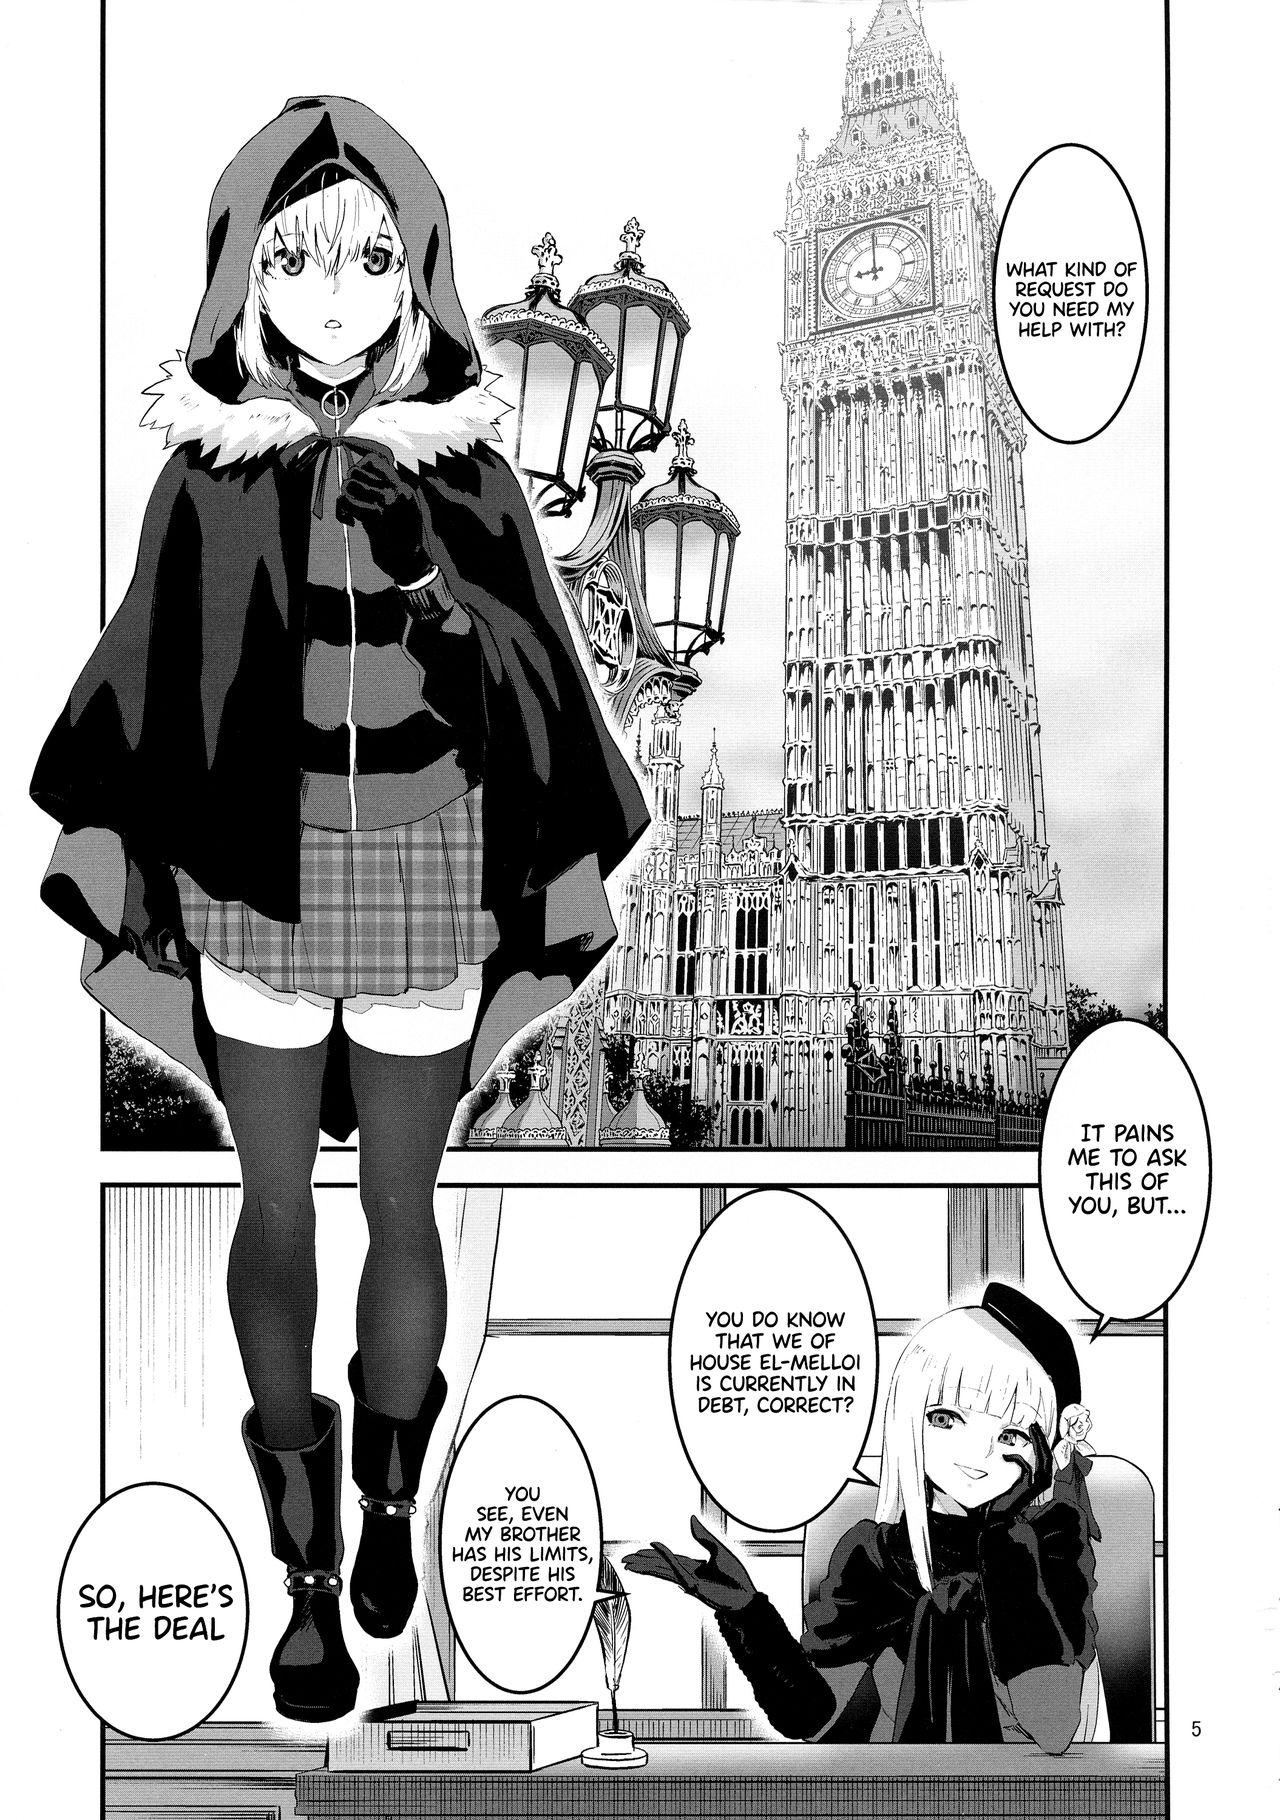 Monster Dick Taking Advantage of Gray-chan Weakness, We Graduated from our Virginity. - Lord el-melloi ii sei no jikenbo Vietnam - Page 5